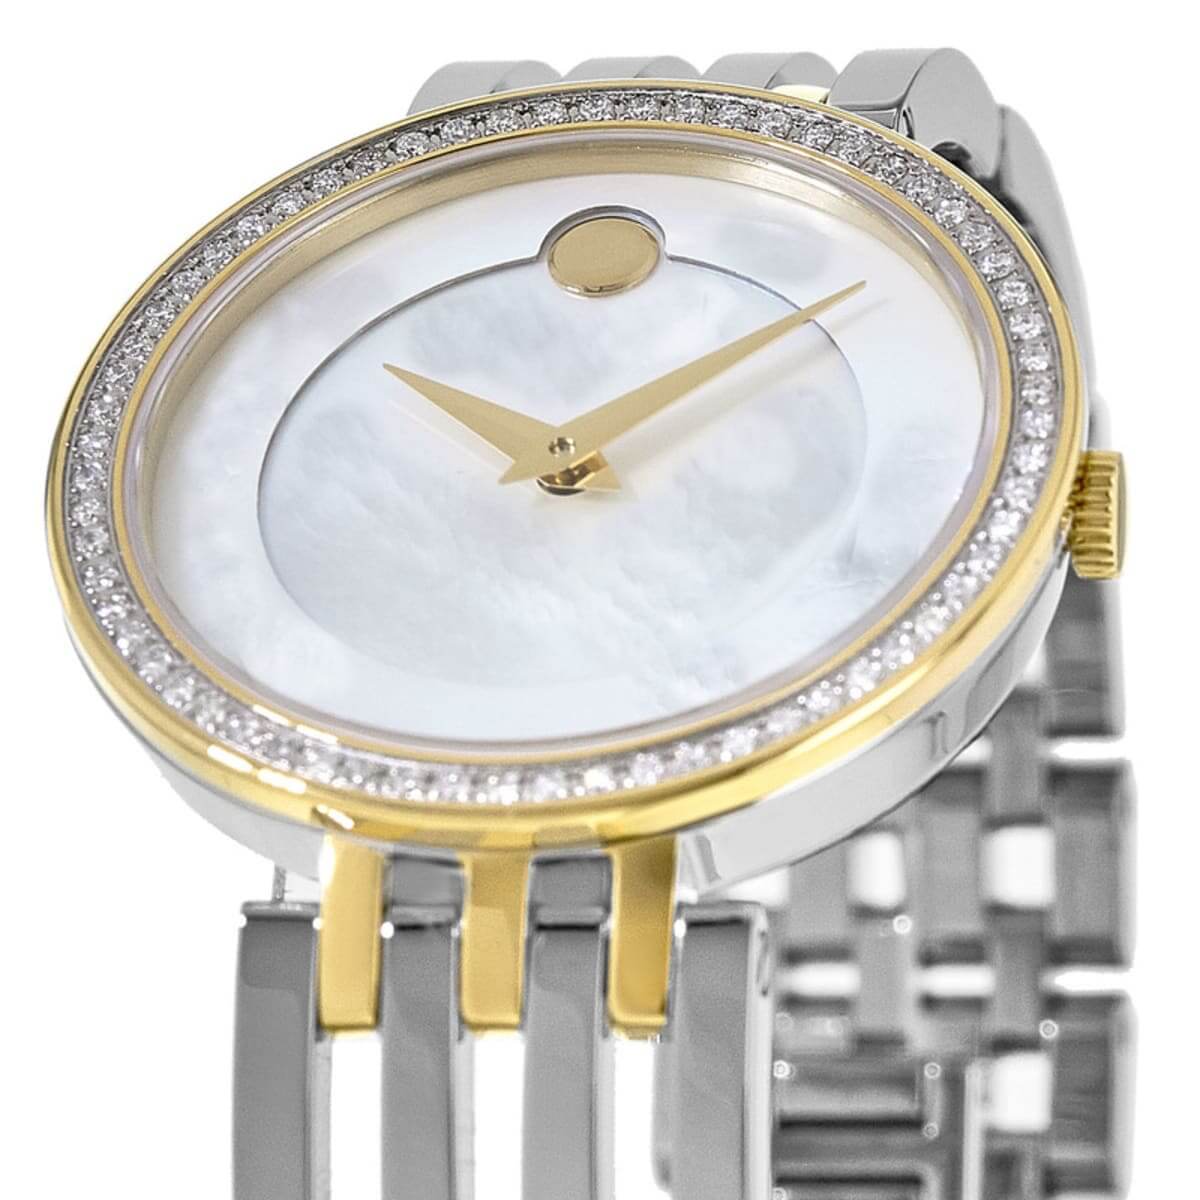 Movado Esperanza Mother of Pearl Dial Two Tone Steel Strap Watch For Women - 0607085